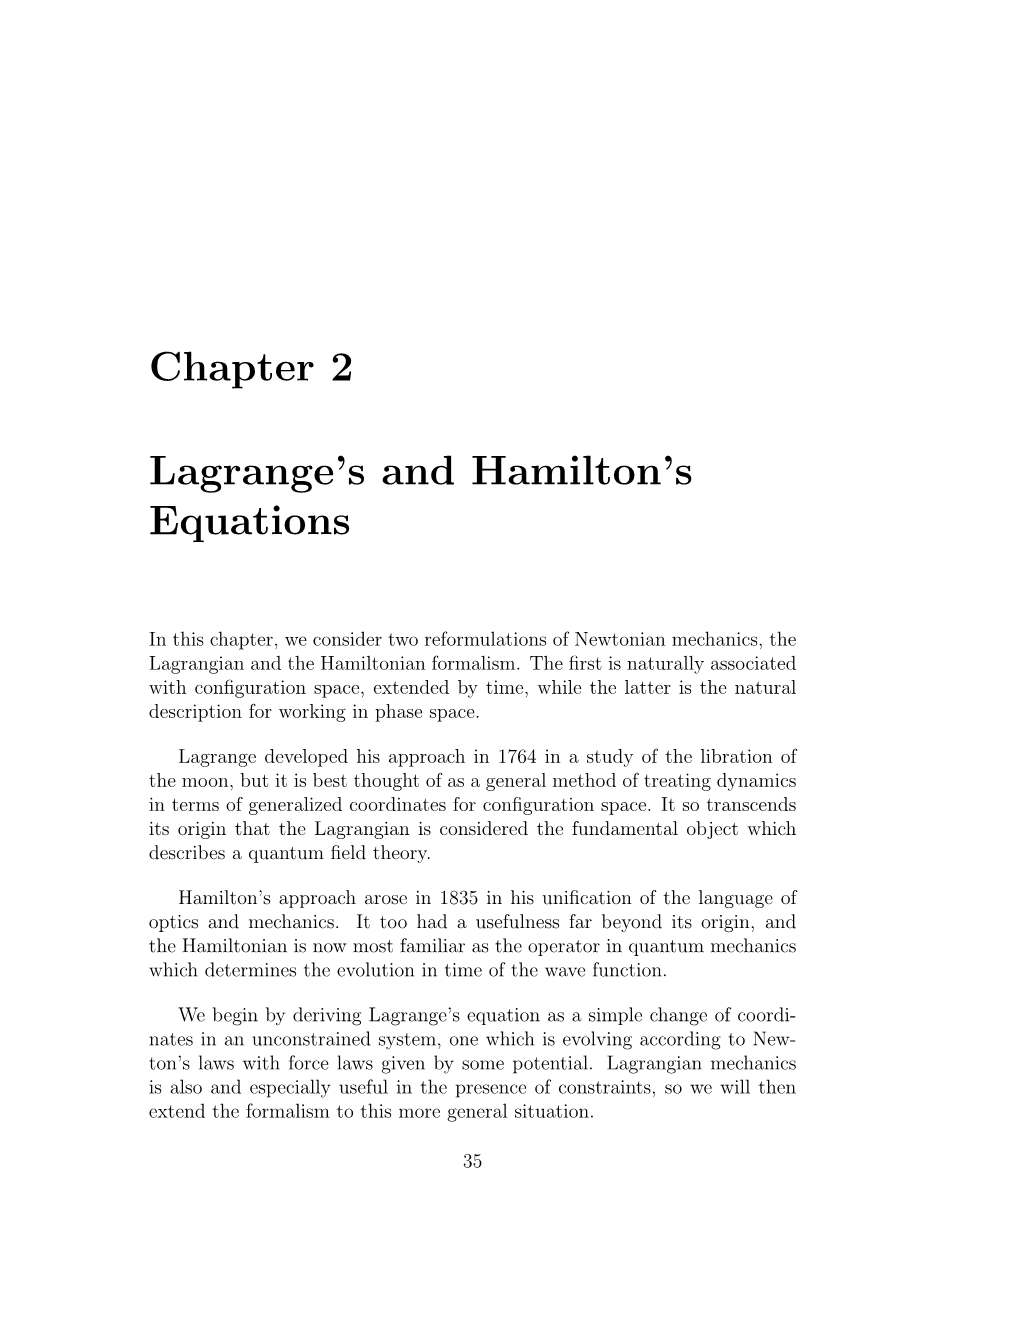 Chapter 2 Lagrange's and Hamilton's Equations